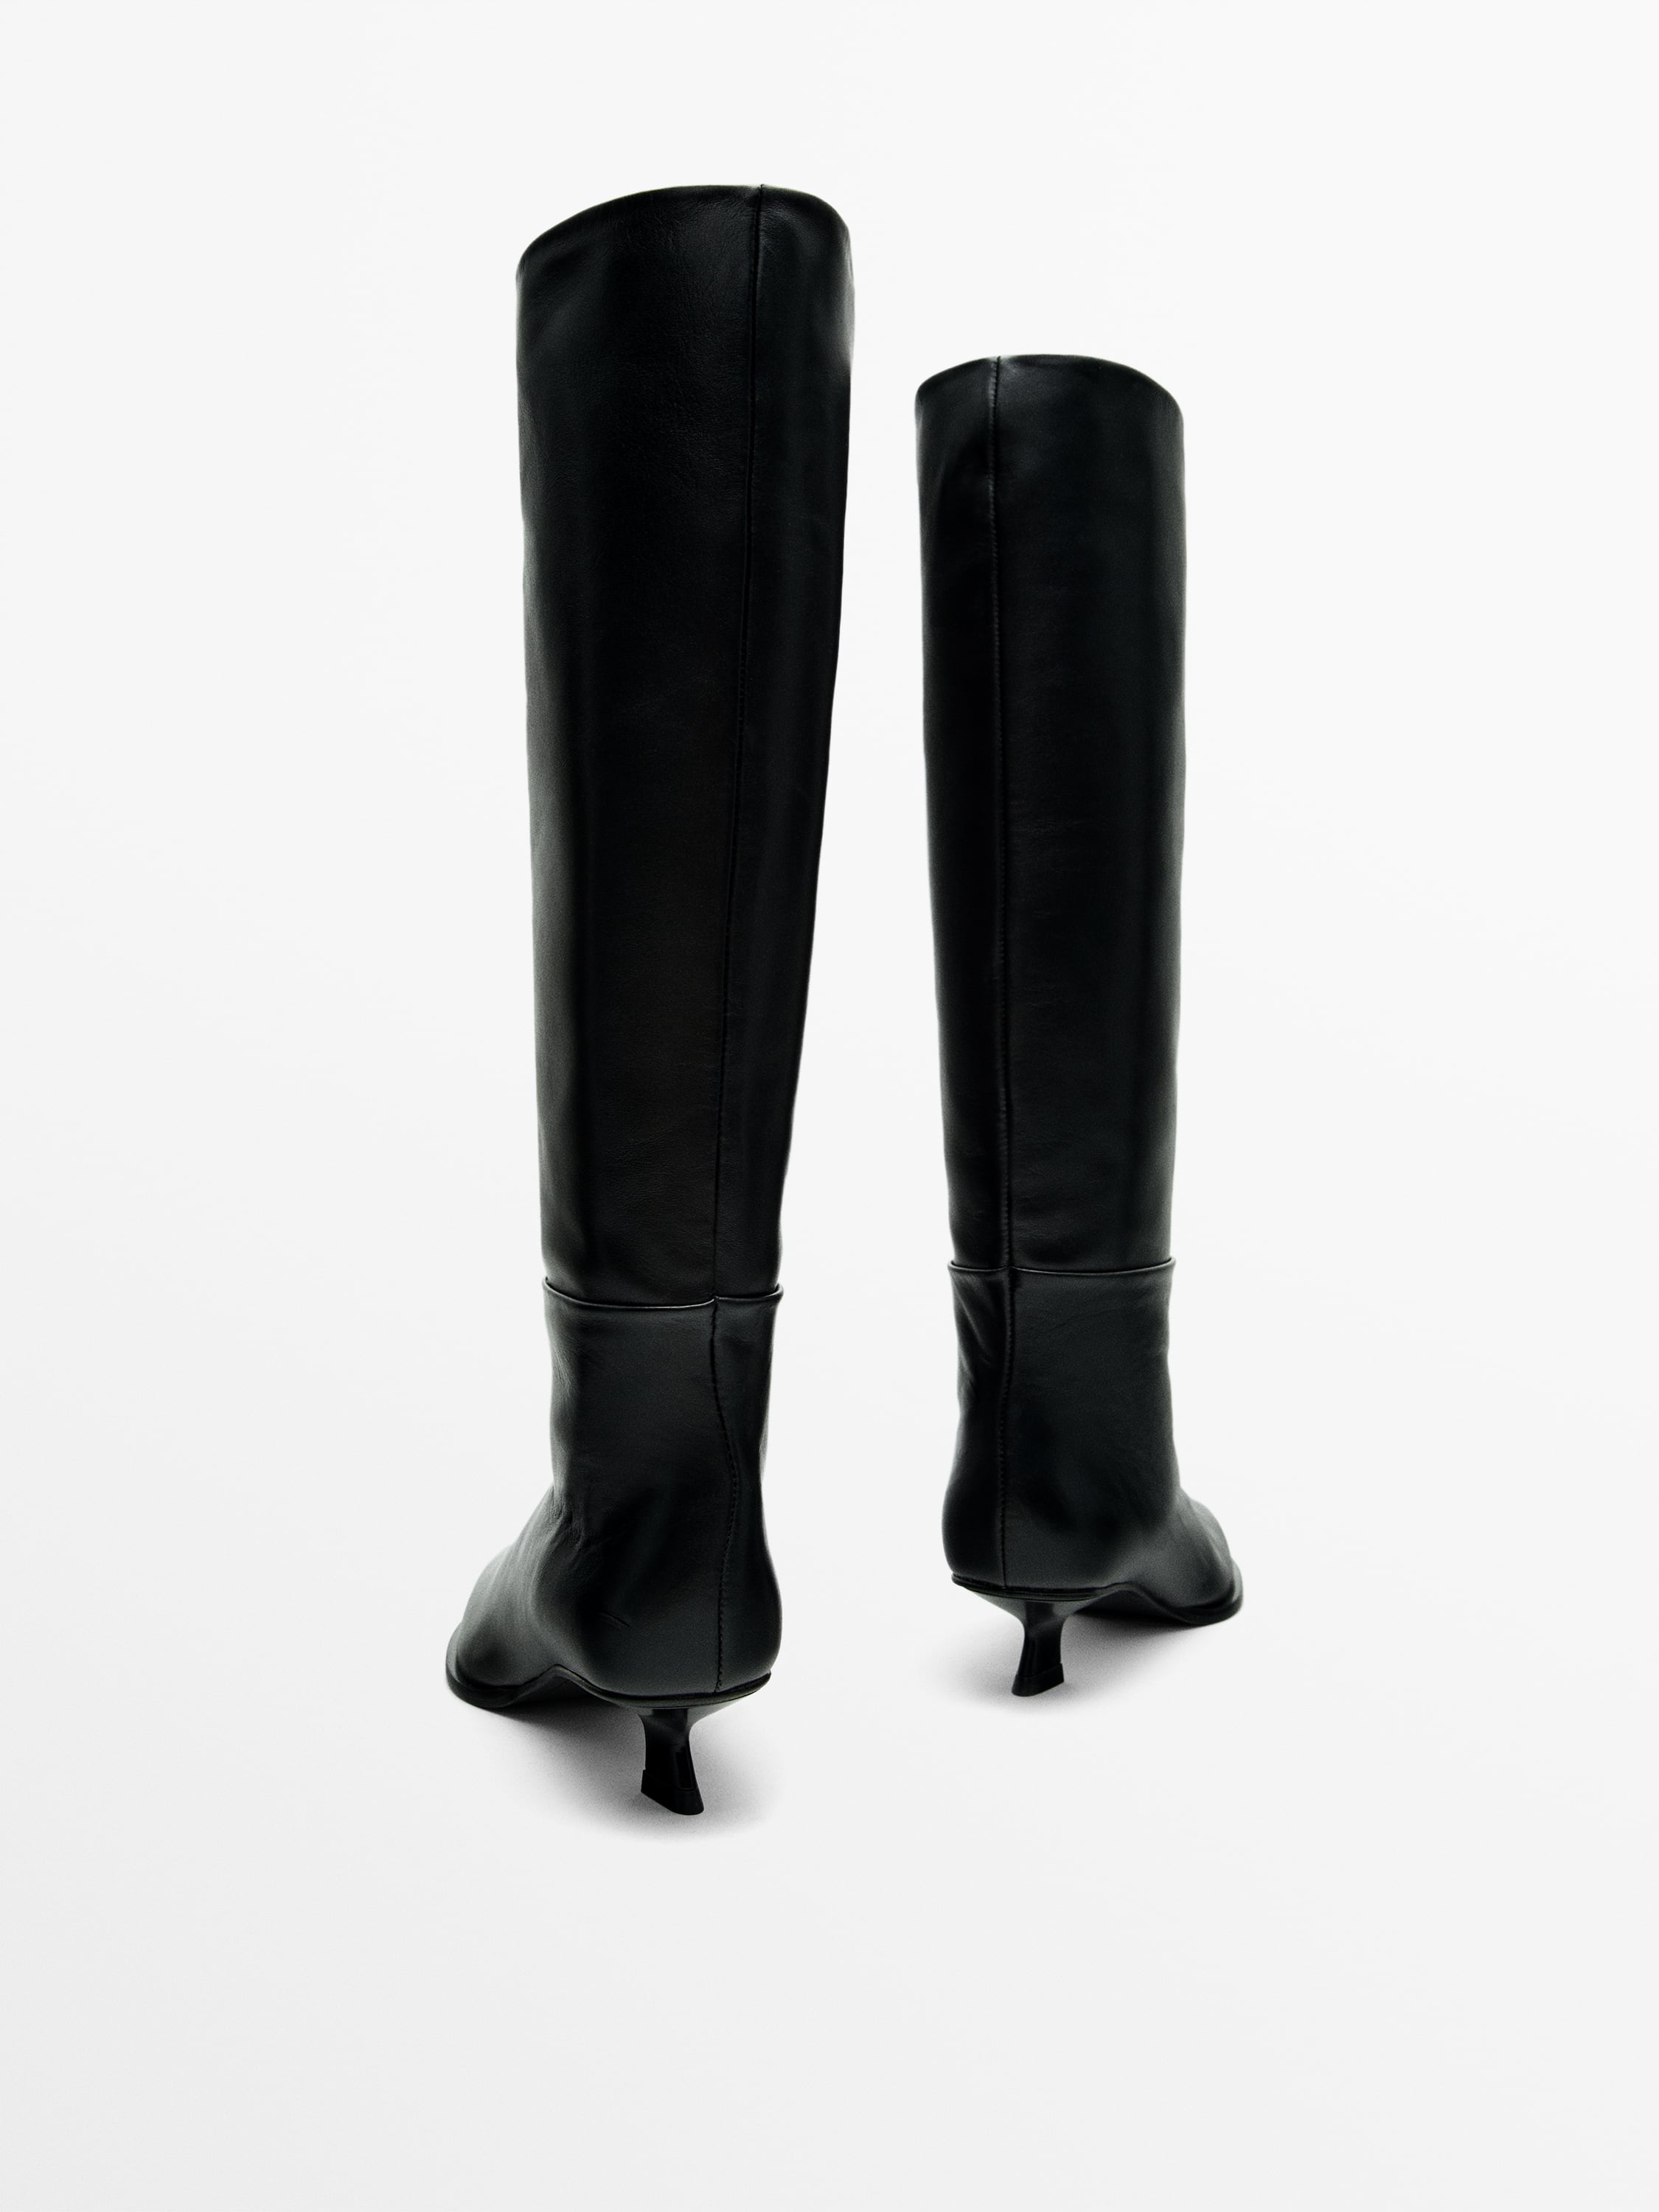 Heeled leather boots